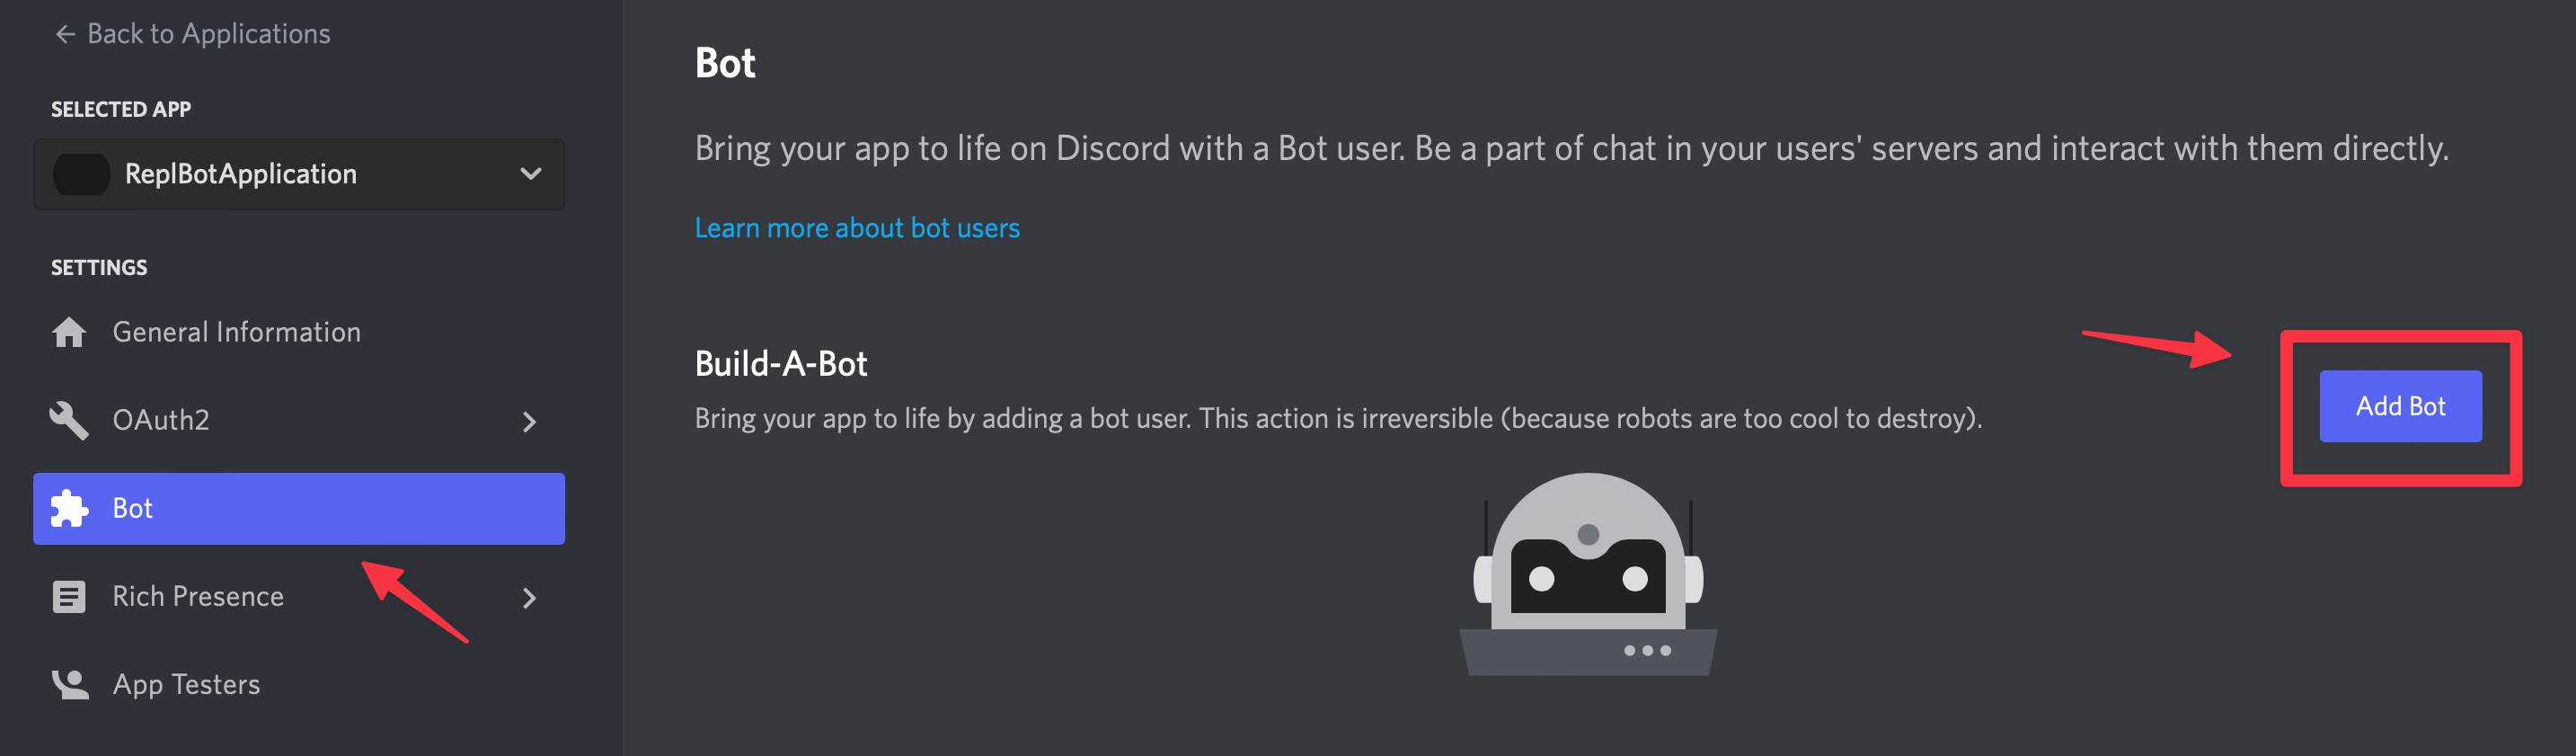 Adding a bot to our Discord Application